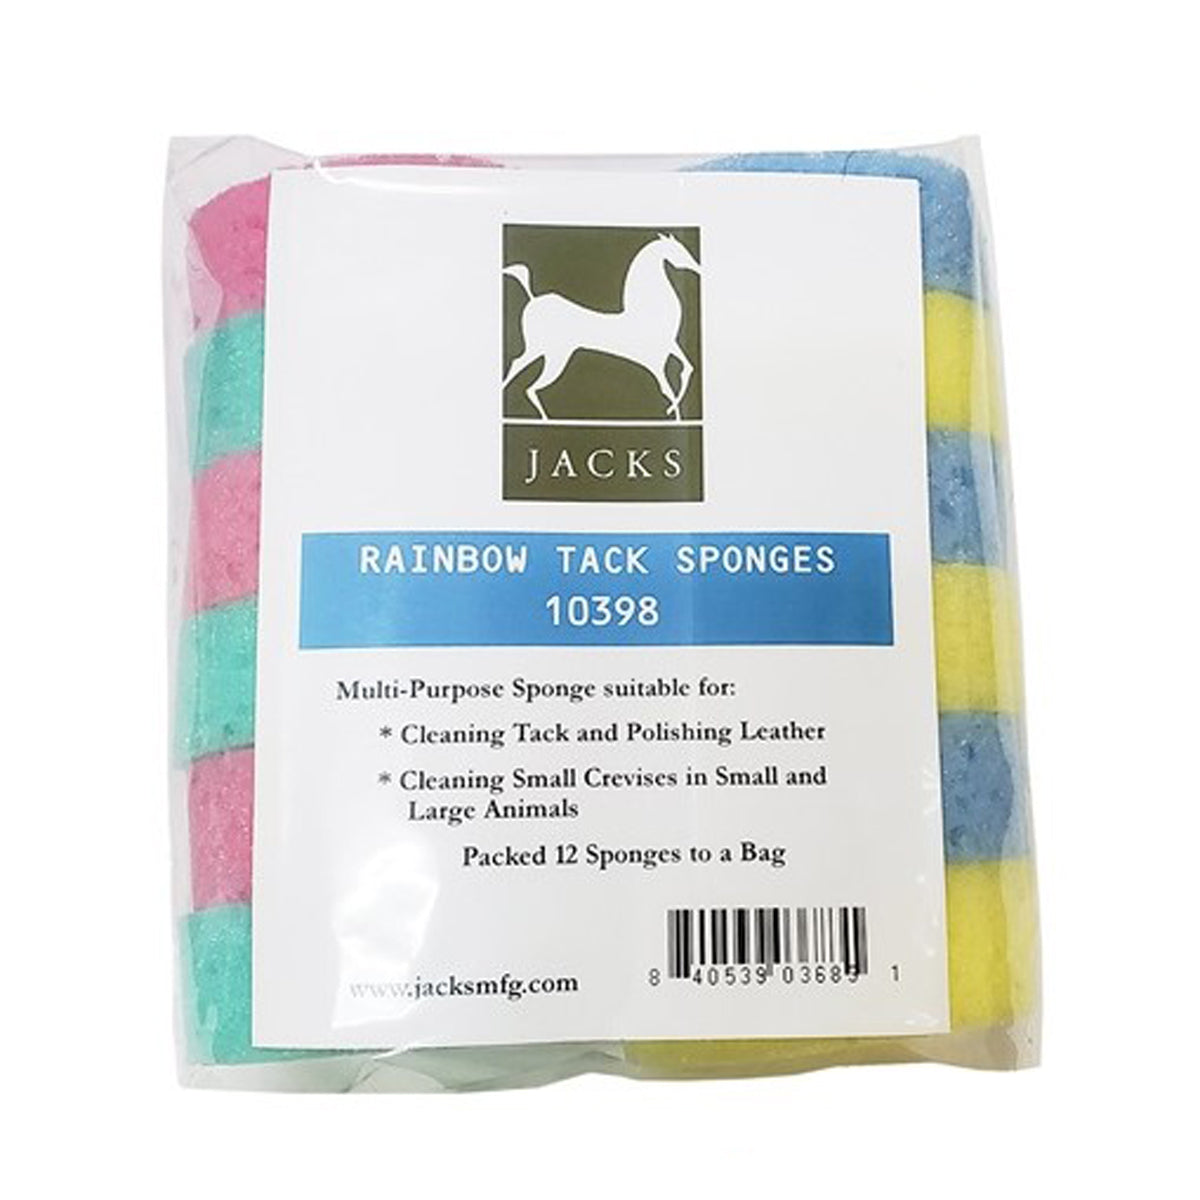 Decker Tack Sponge at Tractor Supply Co.